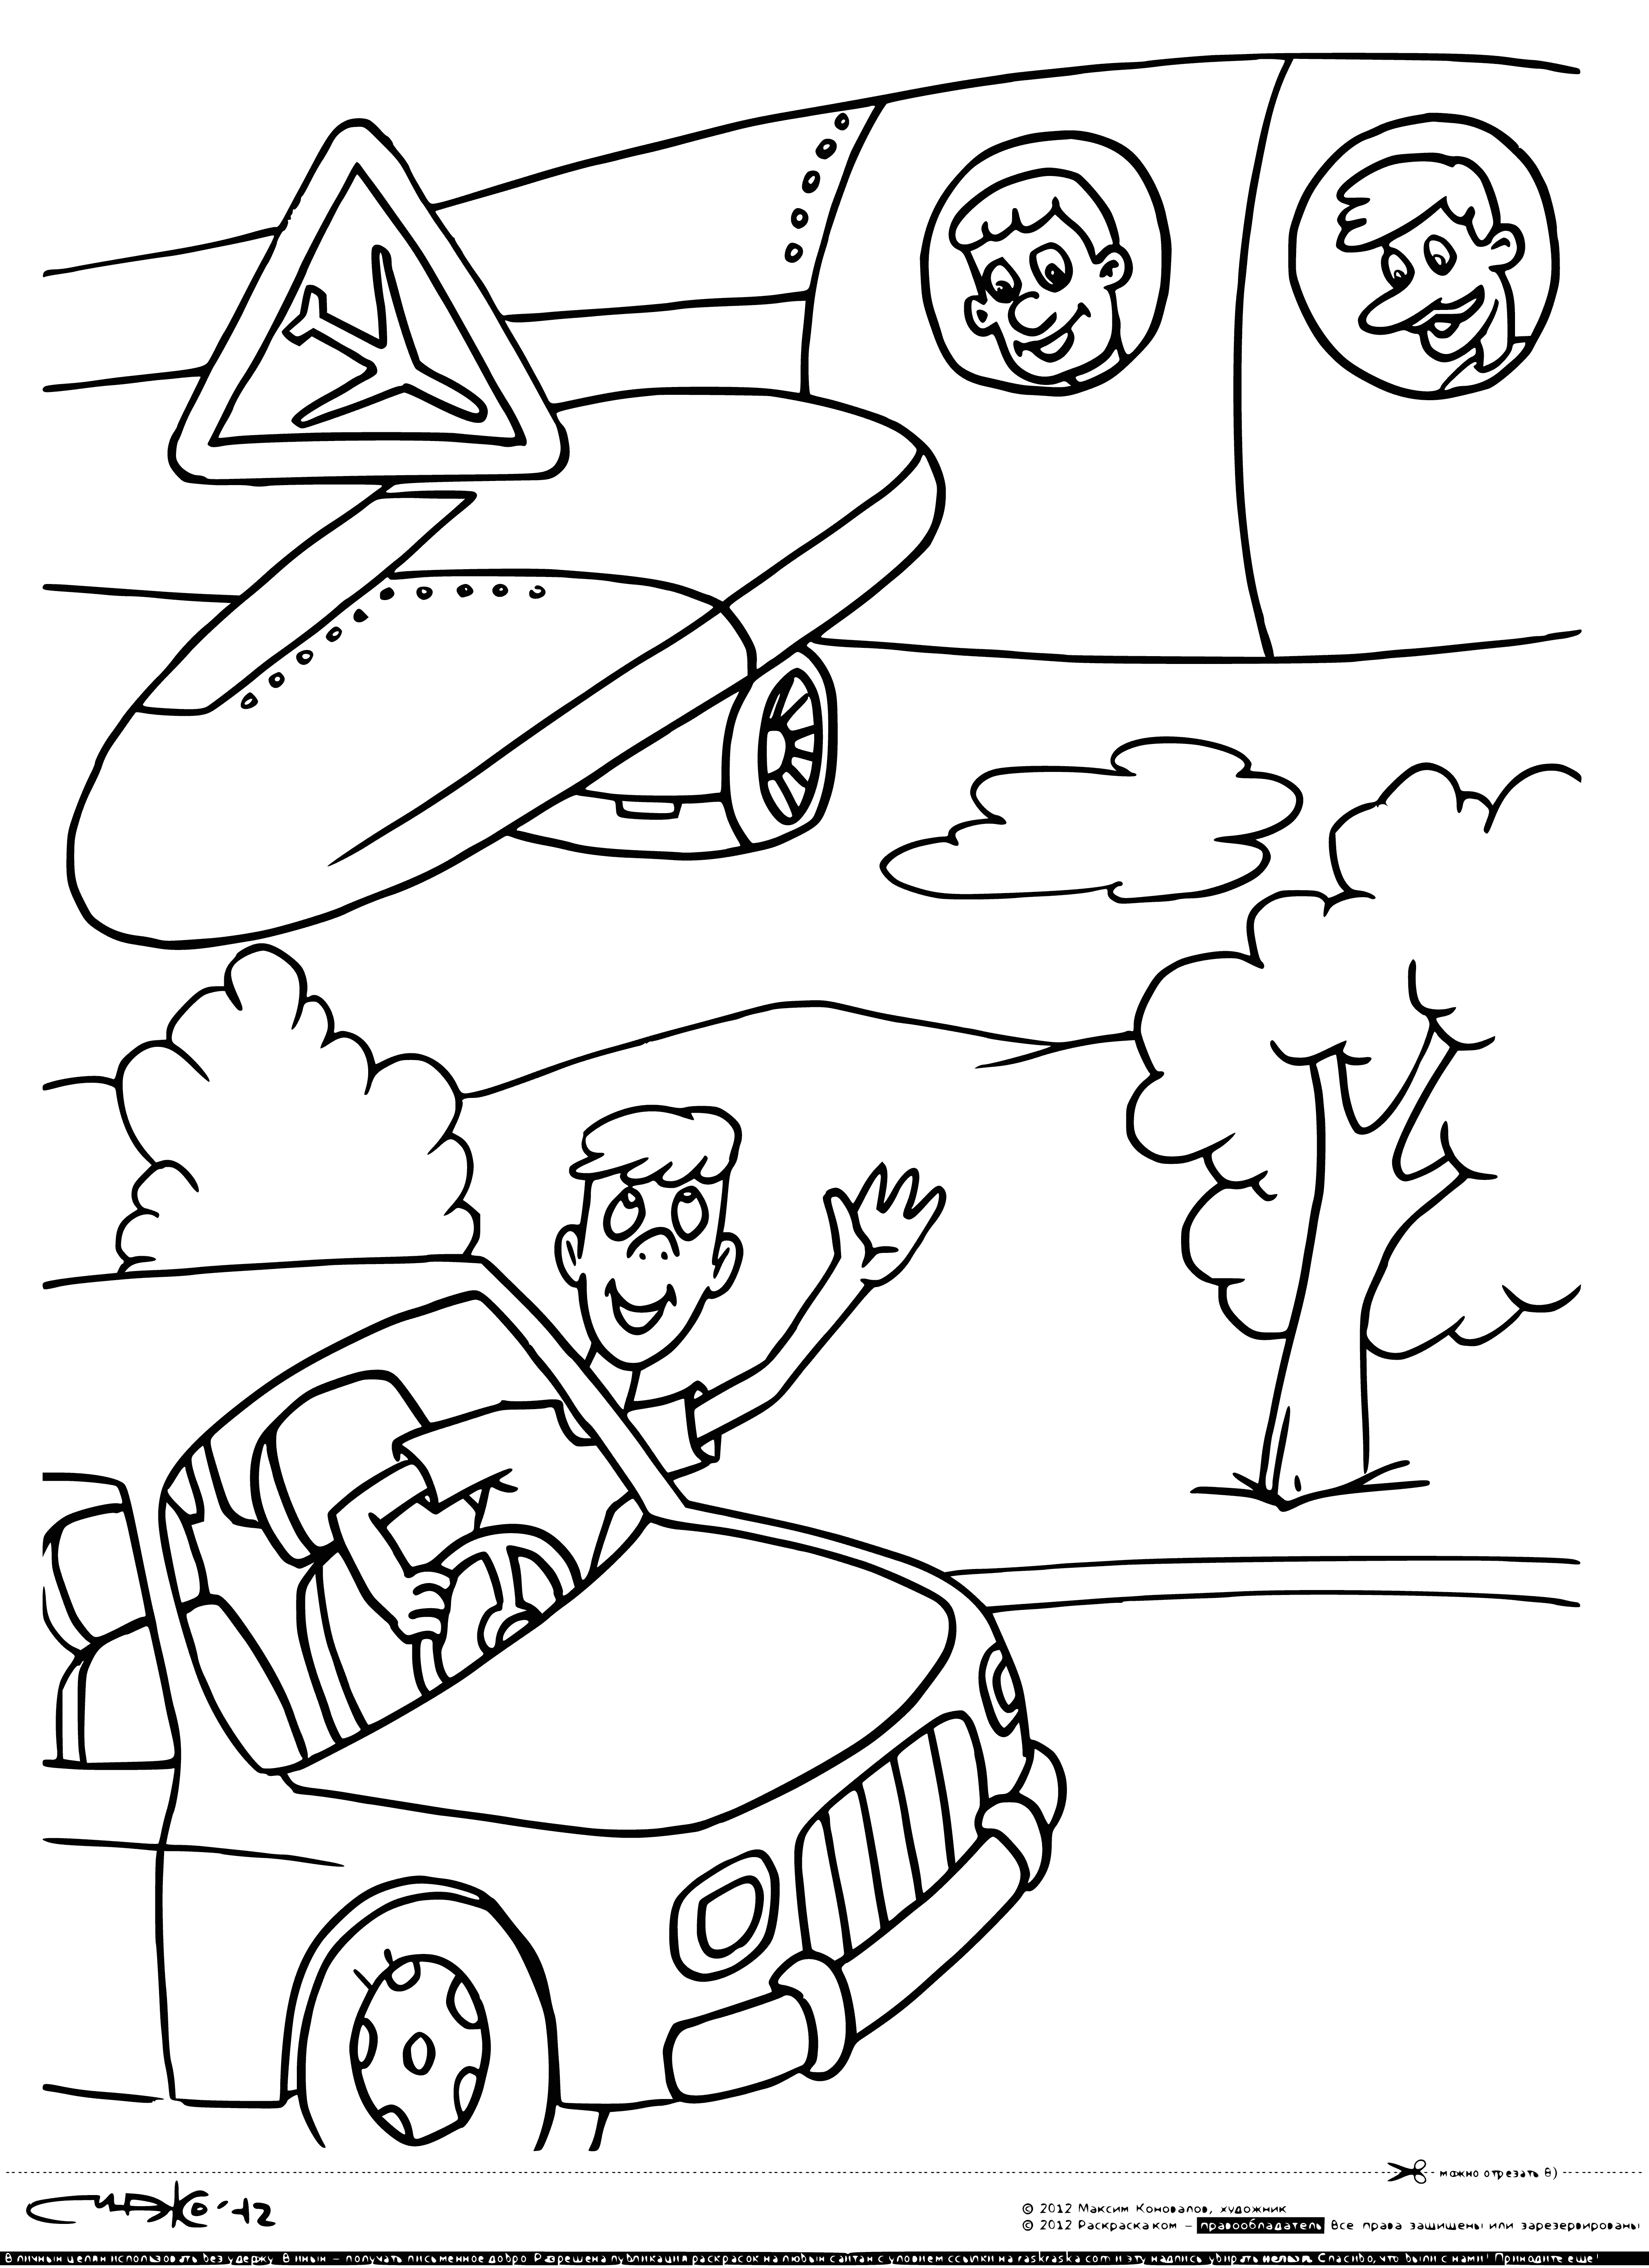 coloring page: Stop sign with "P" in white rectangular sign: no parking. #Stopsign #Parking